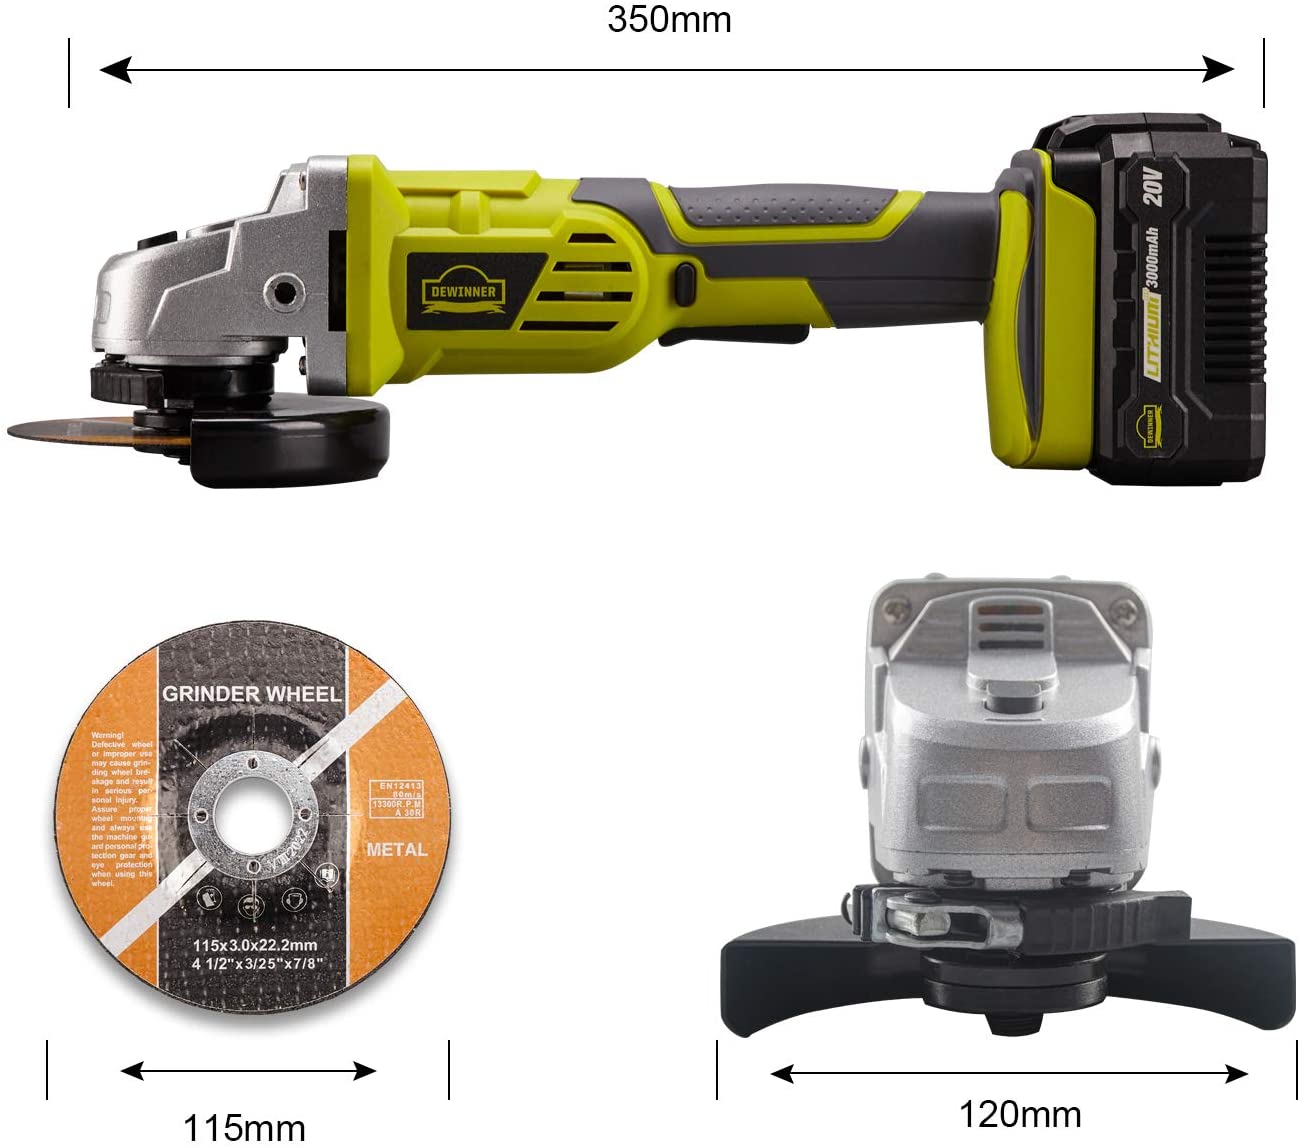 DEWINNER Cordless Angle Grinder, 4 ½", 2-Position Adjustable Auxiliary Handle, Electric Brake,20V,8500 RPM w/ 3.0Ah Lithium-Ion Battery & Fast Charger,